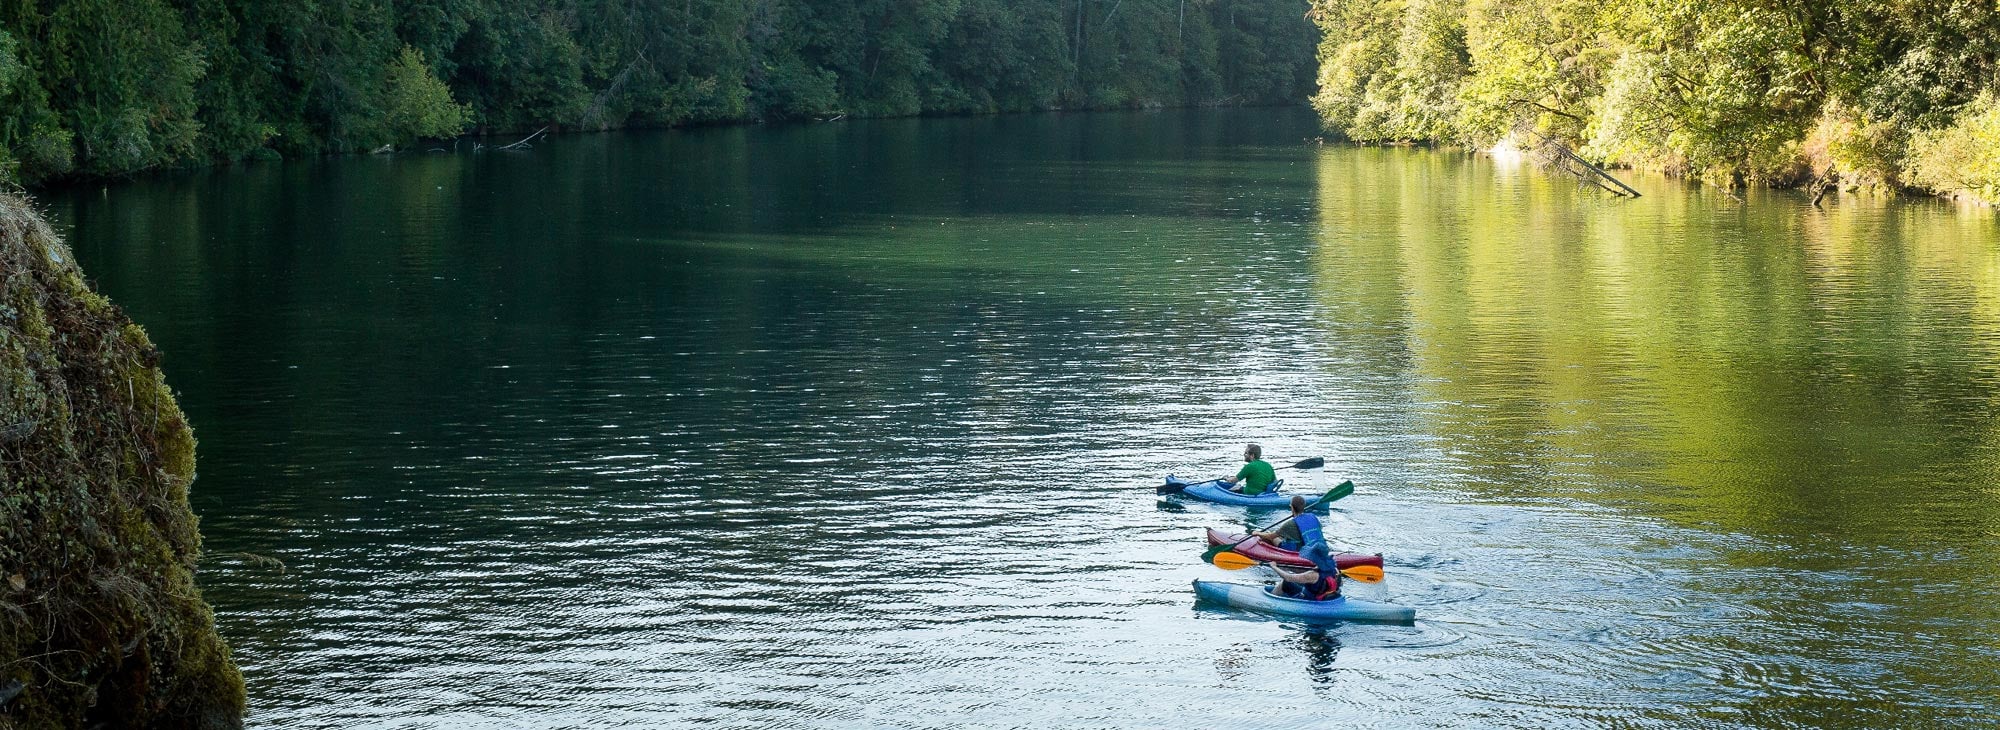 Evening paddle in the Clackamas River